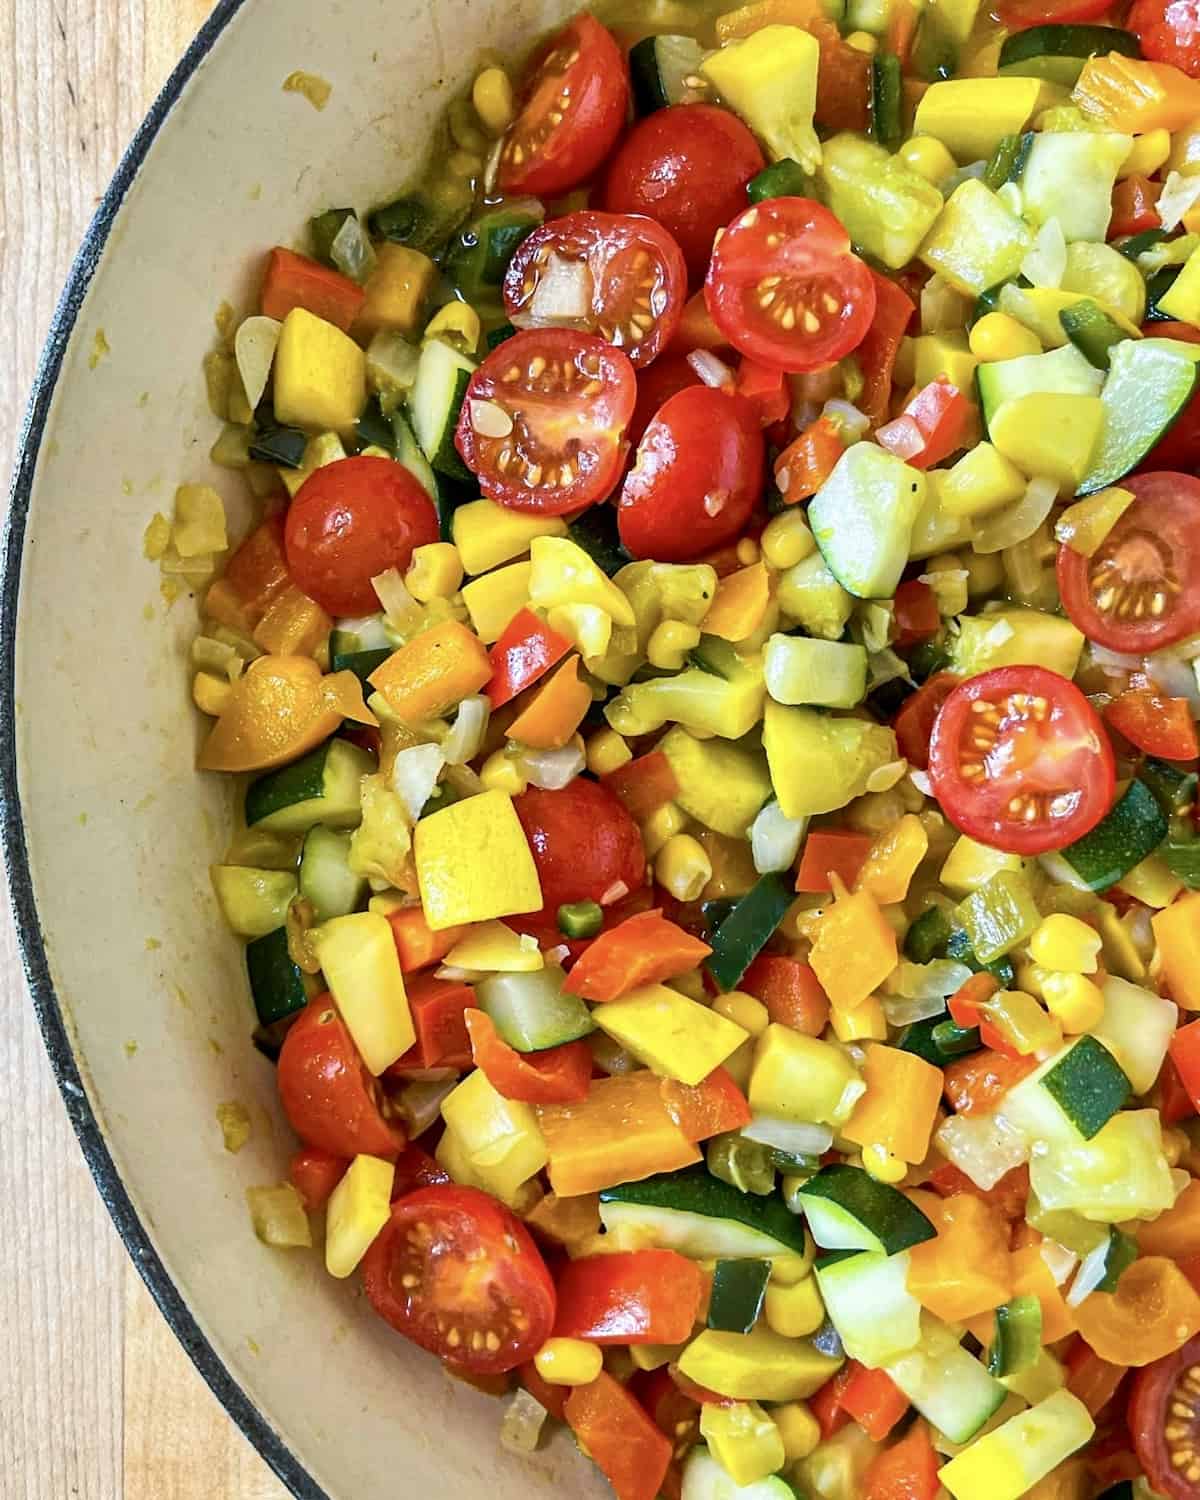 A mixture of diced onions, poblano peppers, bell peppers, zucchini, yellow squash, corn, green chiles, and cherry tomatoes that have been cooked until soft in a skillet.